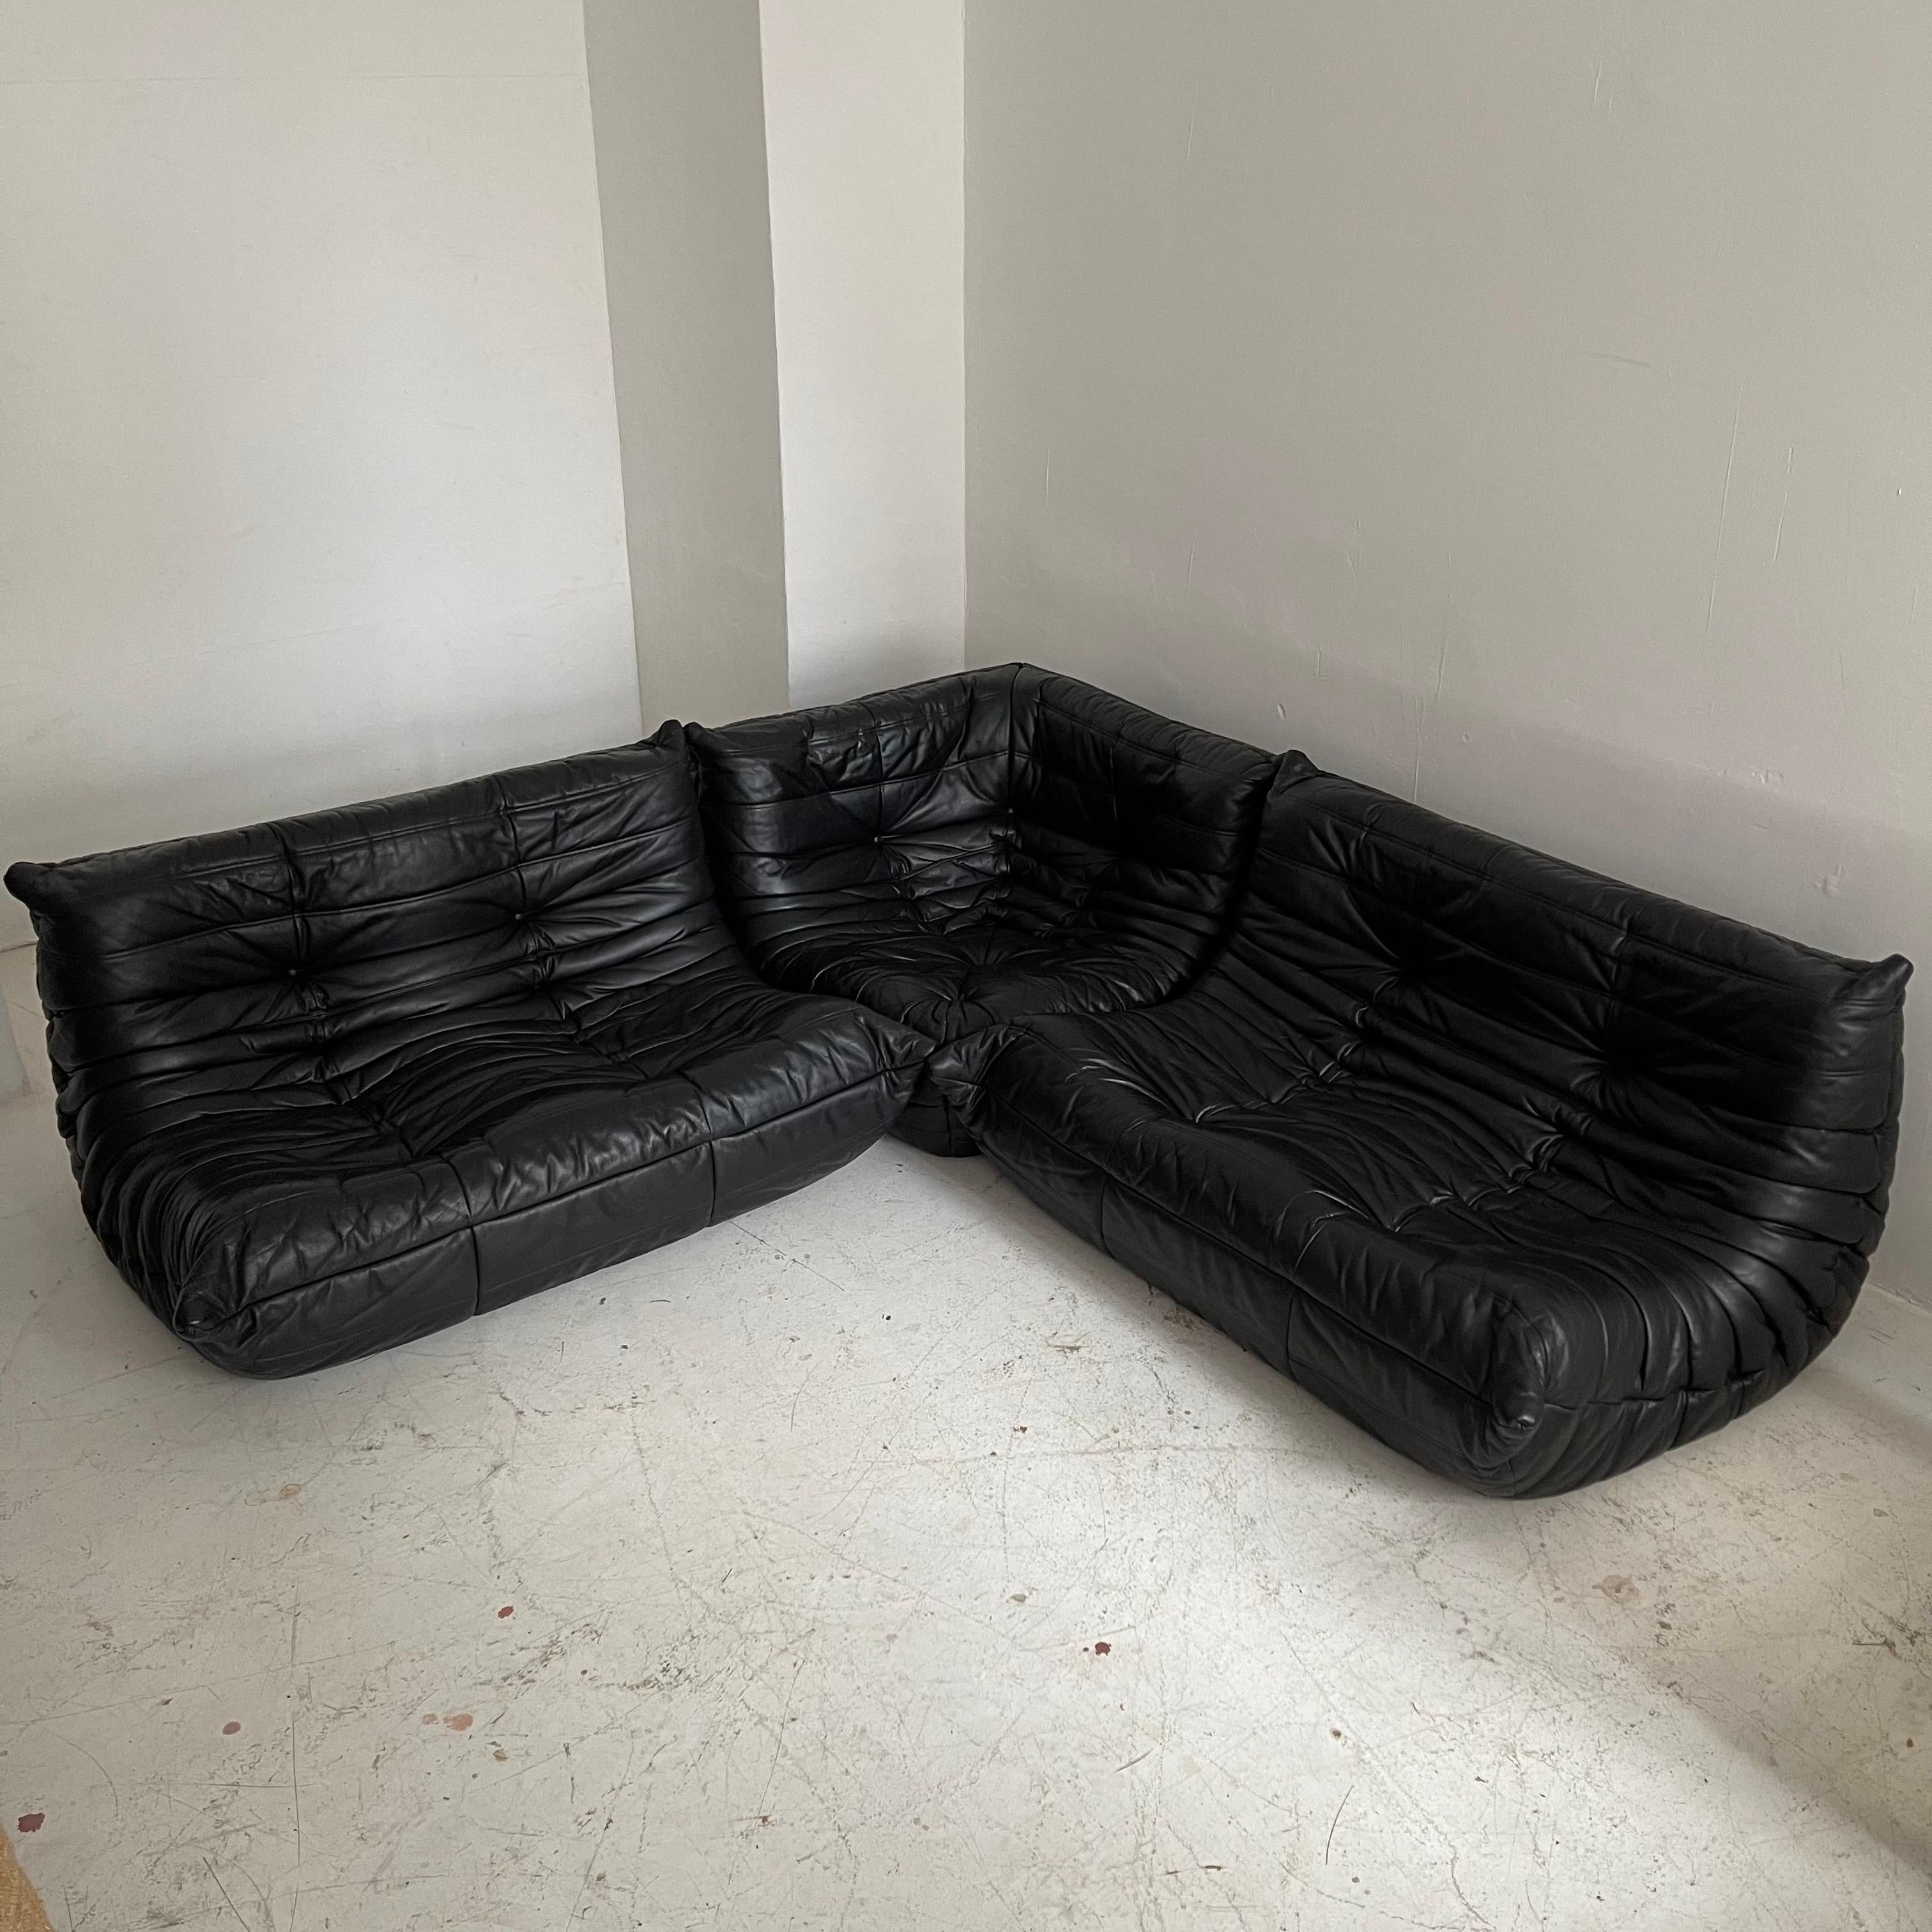 Ligne Roset leather Togo Michel Ducaroy signed, France, 1978. 100% Authentic with original Ligne Roset leather. Beat the Ligne Roset lead time for current production with our quick ship option with 7 day delivery time to the USA.